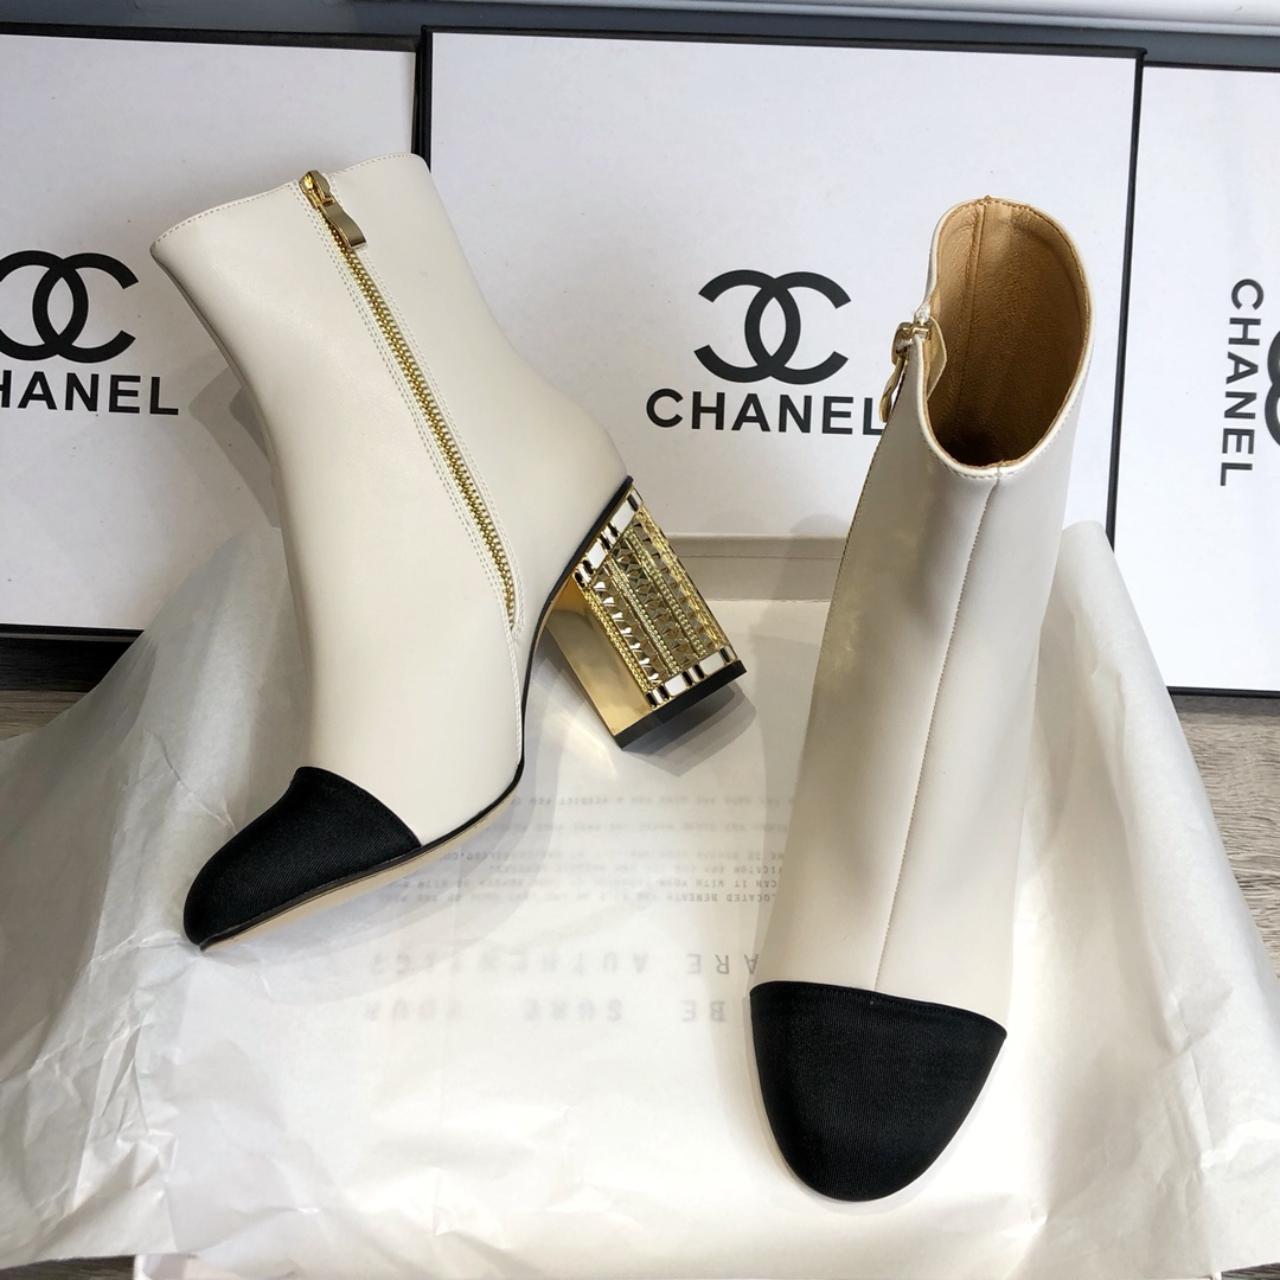 CHANEL boots Come with a box， This is lady's size - Depop